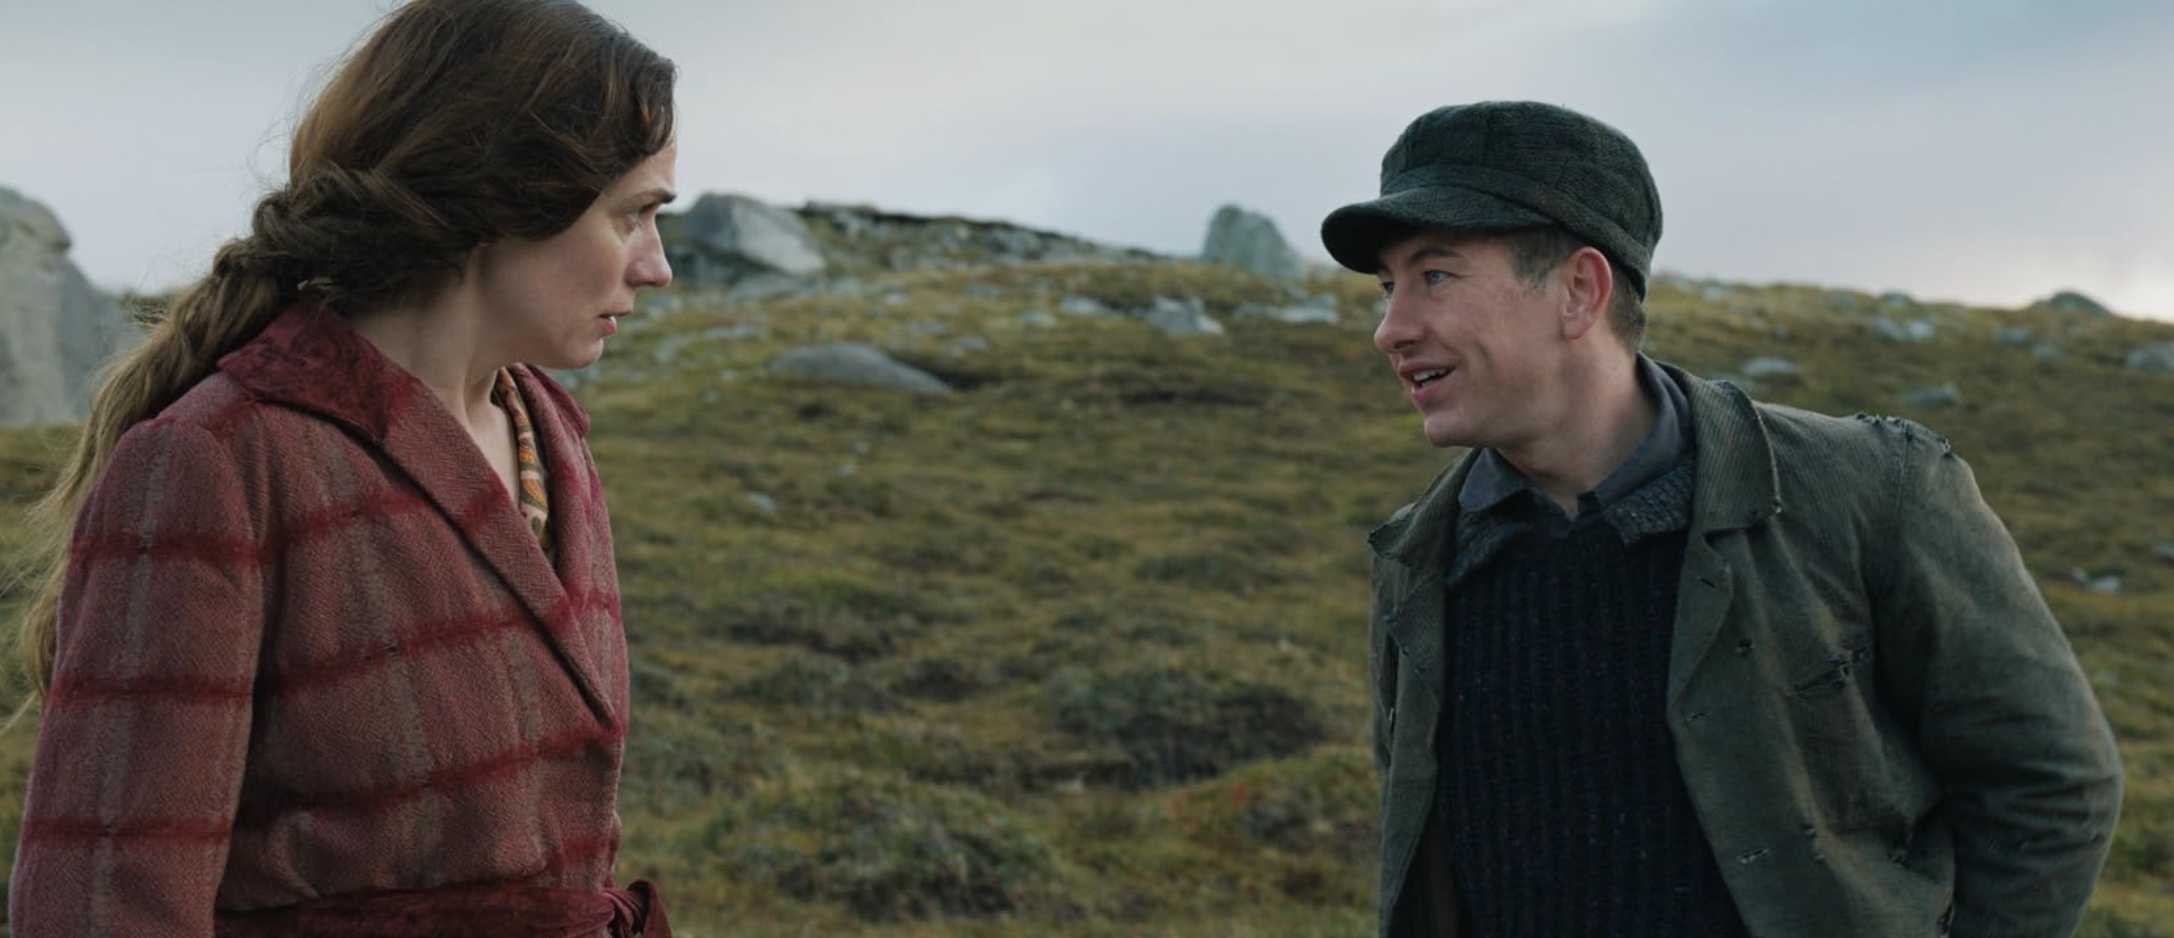 A man and woman speak in the countryside in this image from Blueprint Pictures.